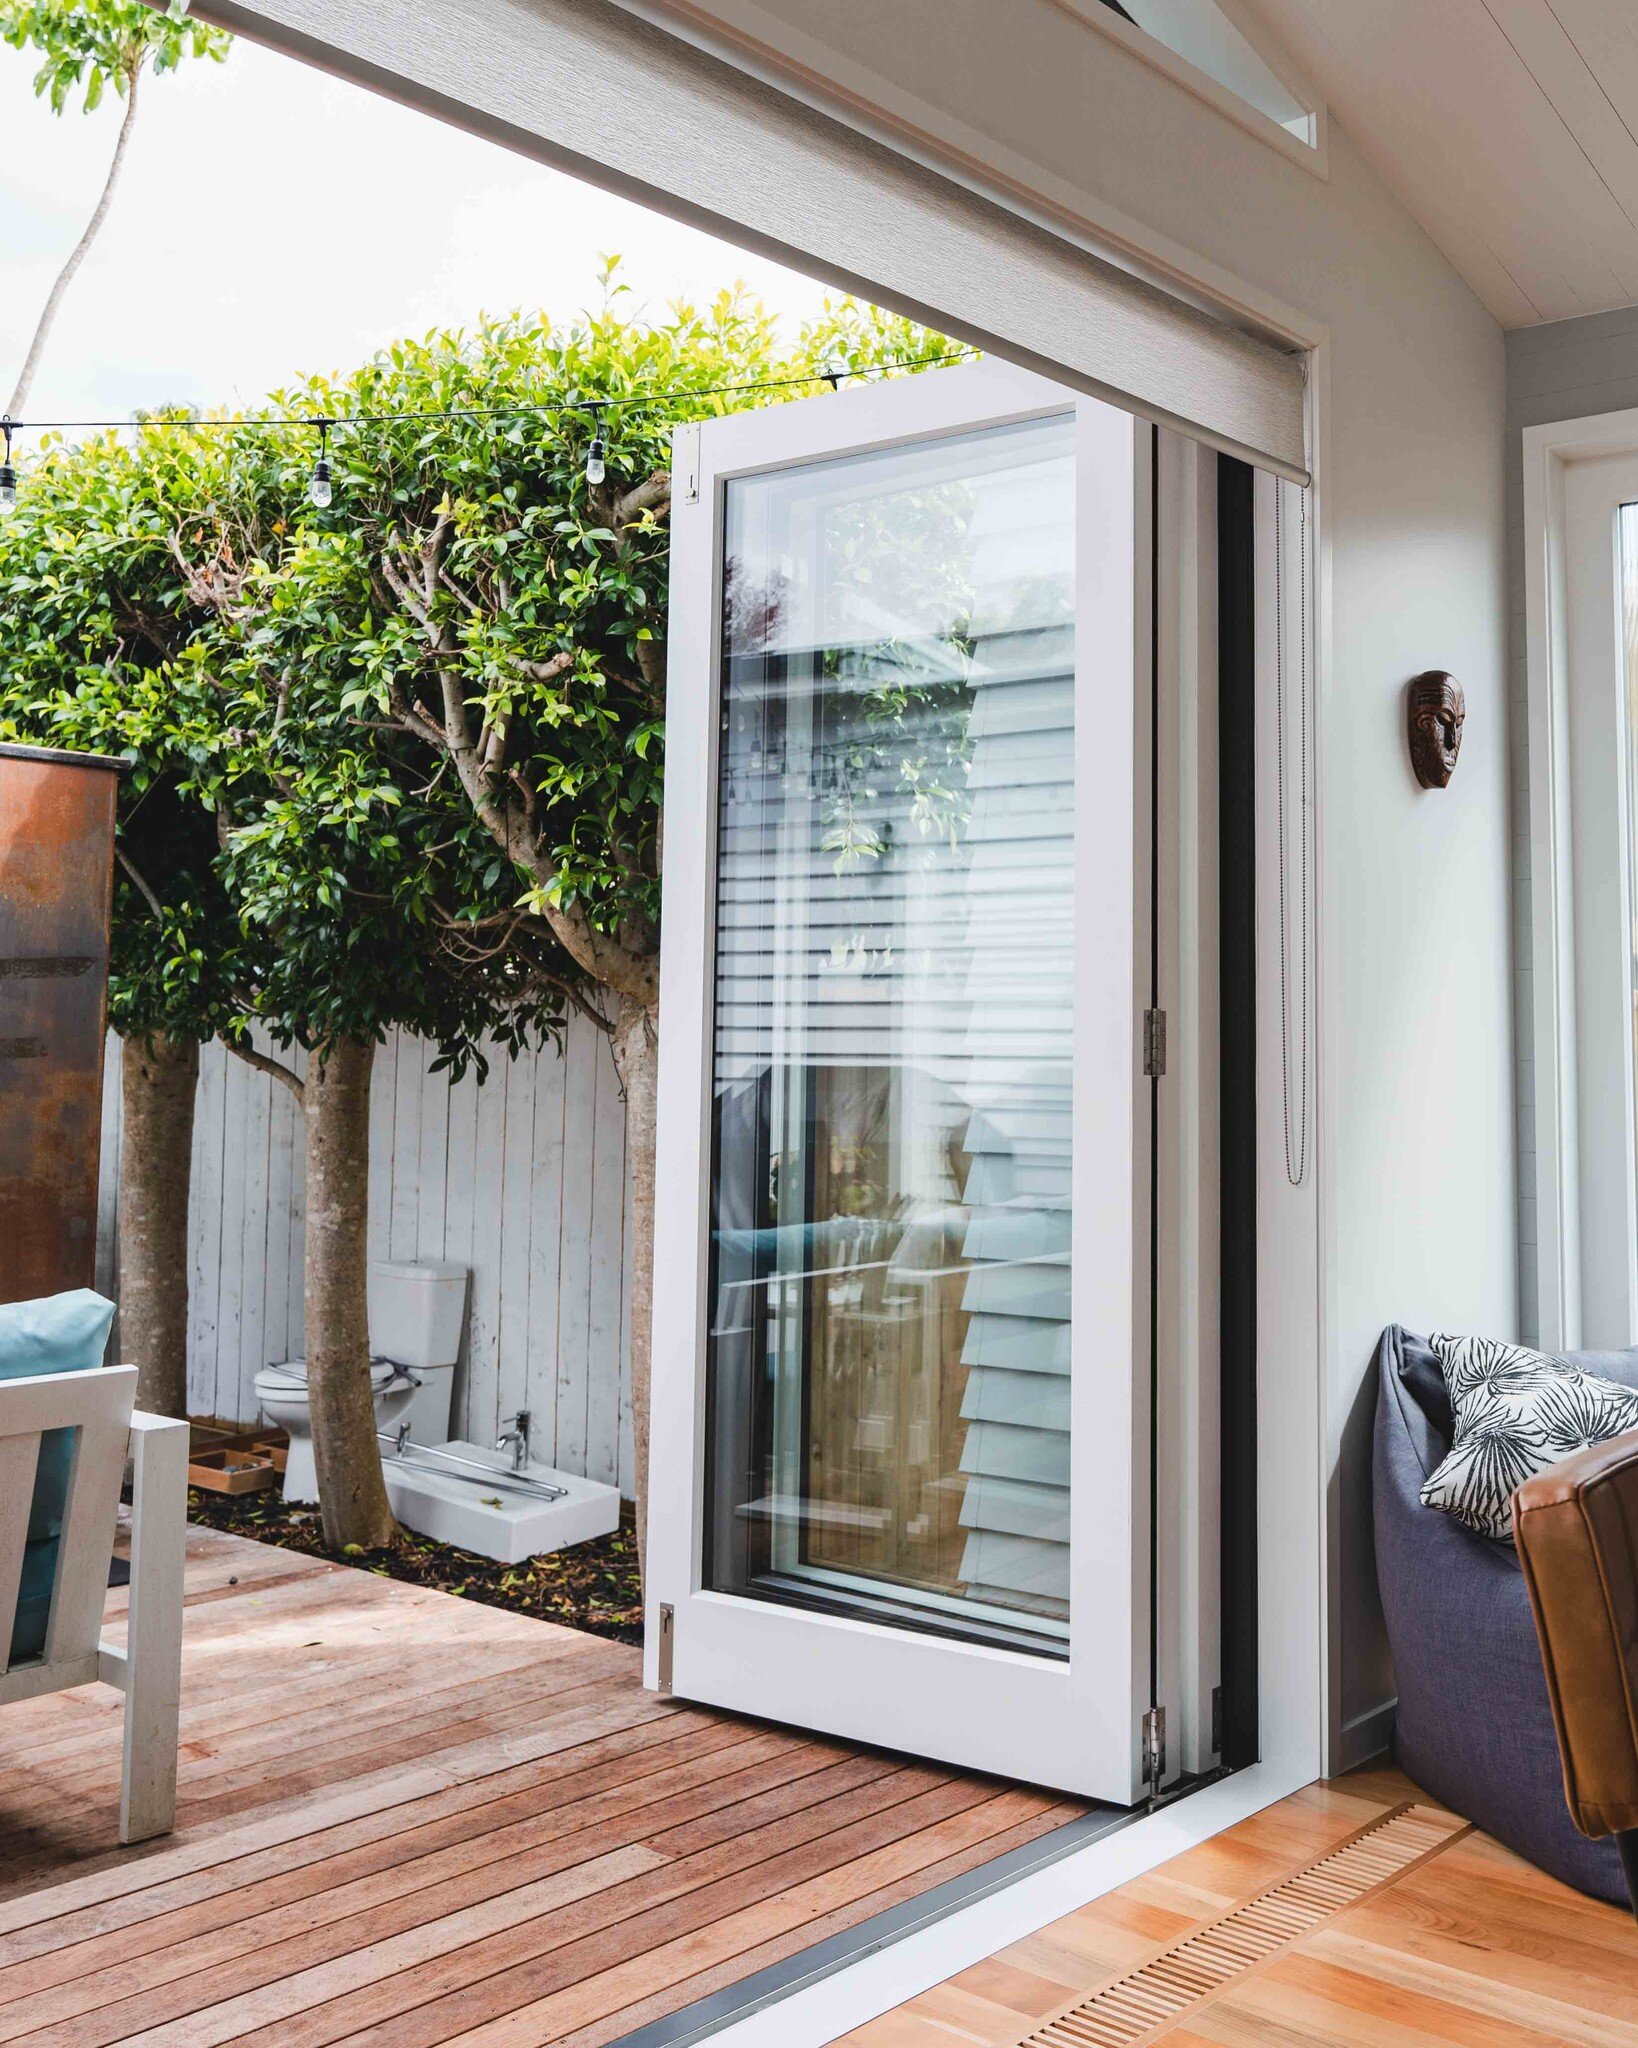 Bifold or Sliders? Here are some key points to help you make your choice!

Bi-fold Doors
▪️Complete Opening: Can open up fully, offering a wide, unobstructed access to outdoor spaces.
▪️Flexible Configuration: Allows partial or full opening, adapting